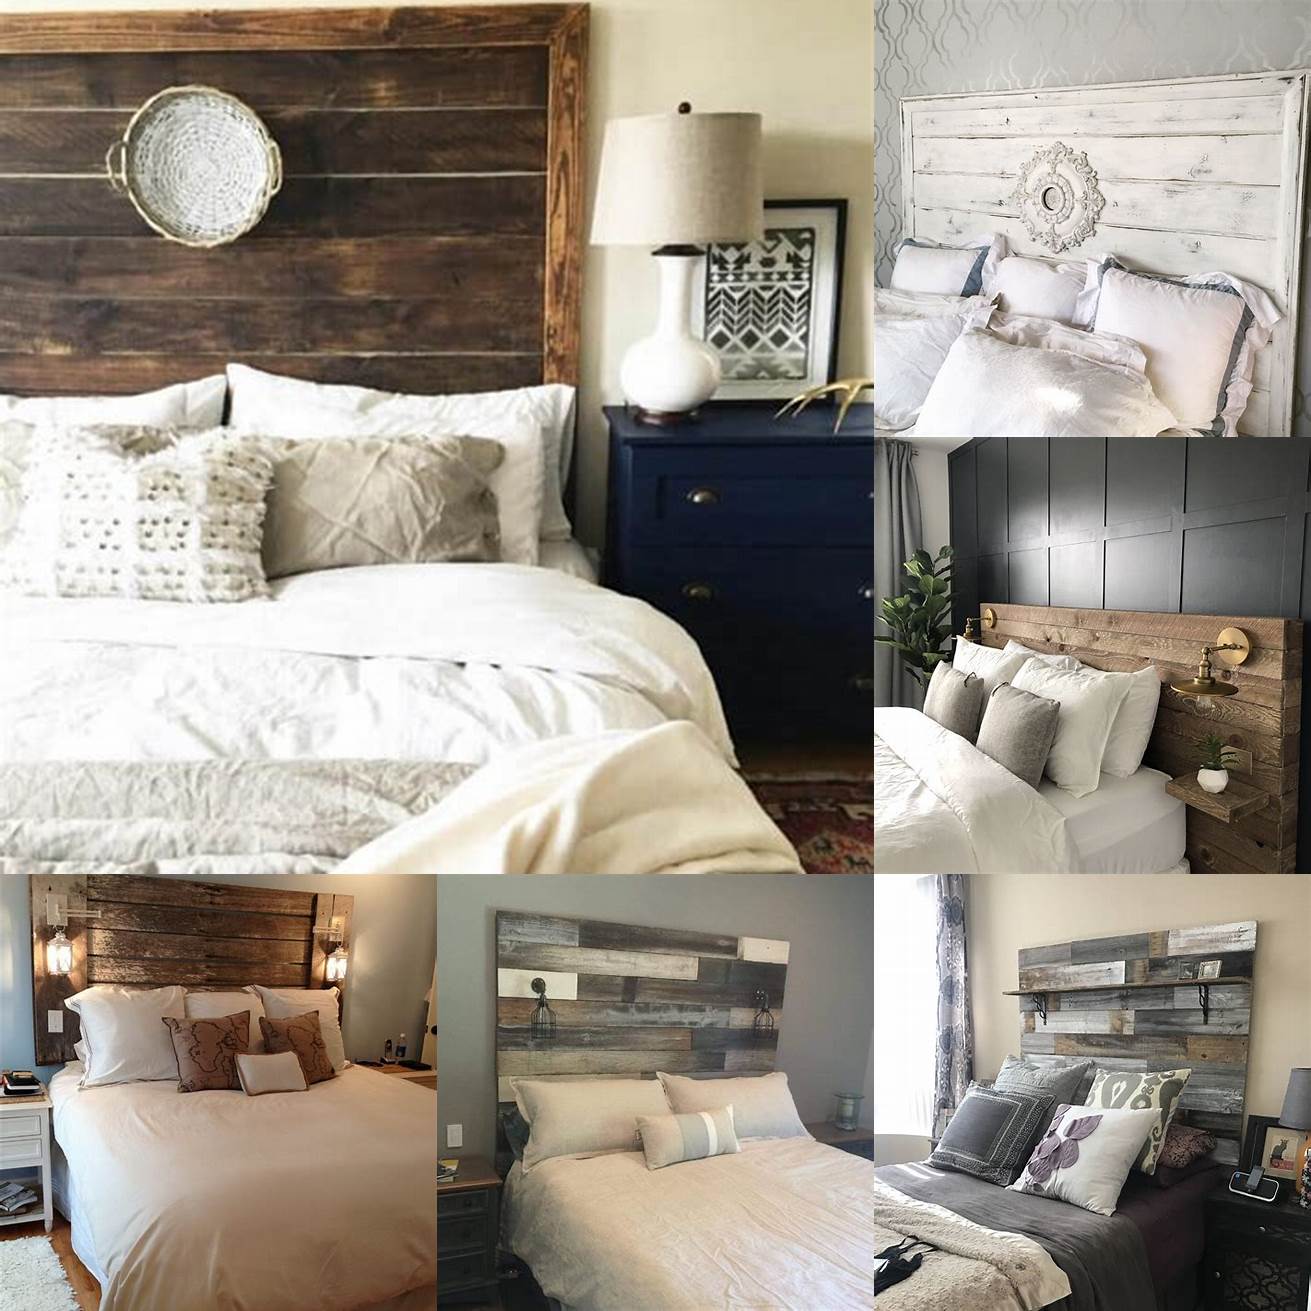 Use a distressed headboard in your bedroom